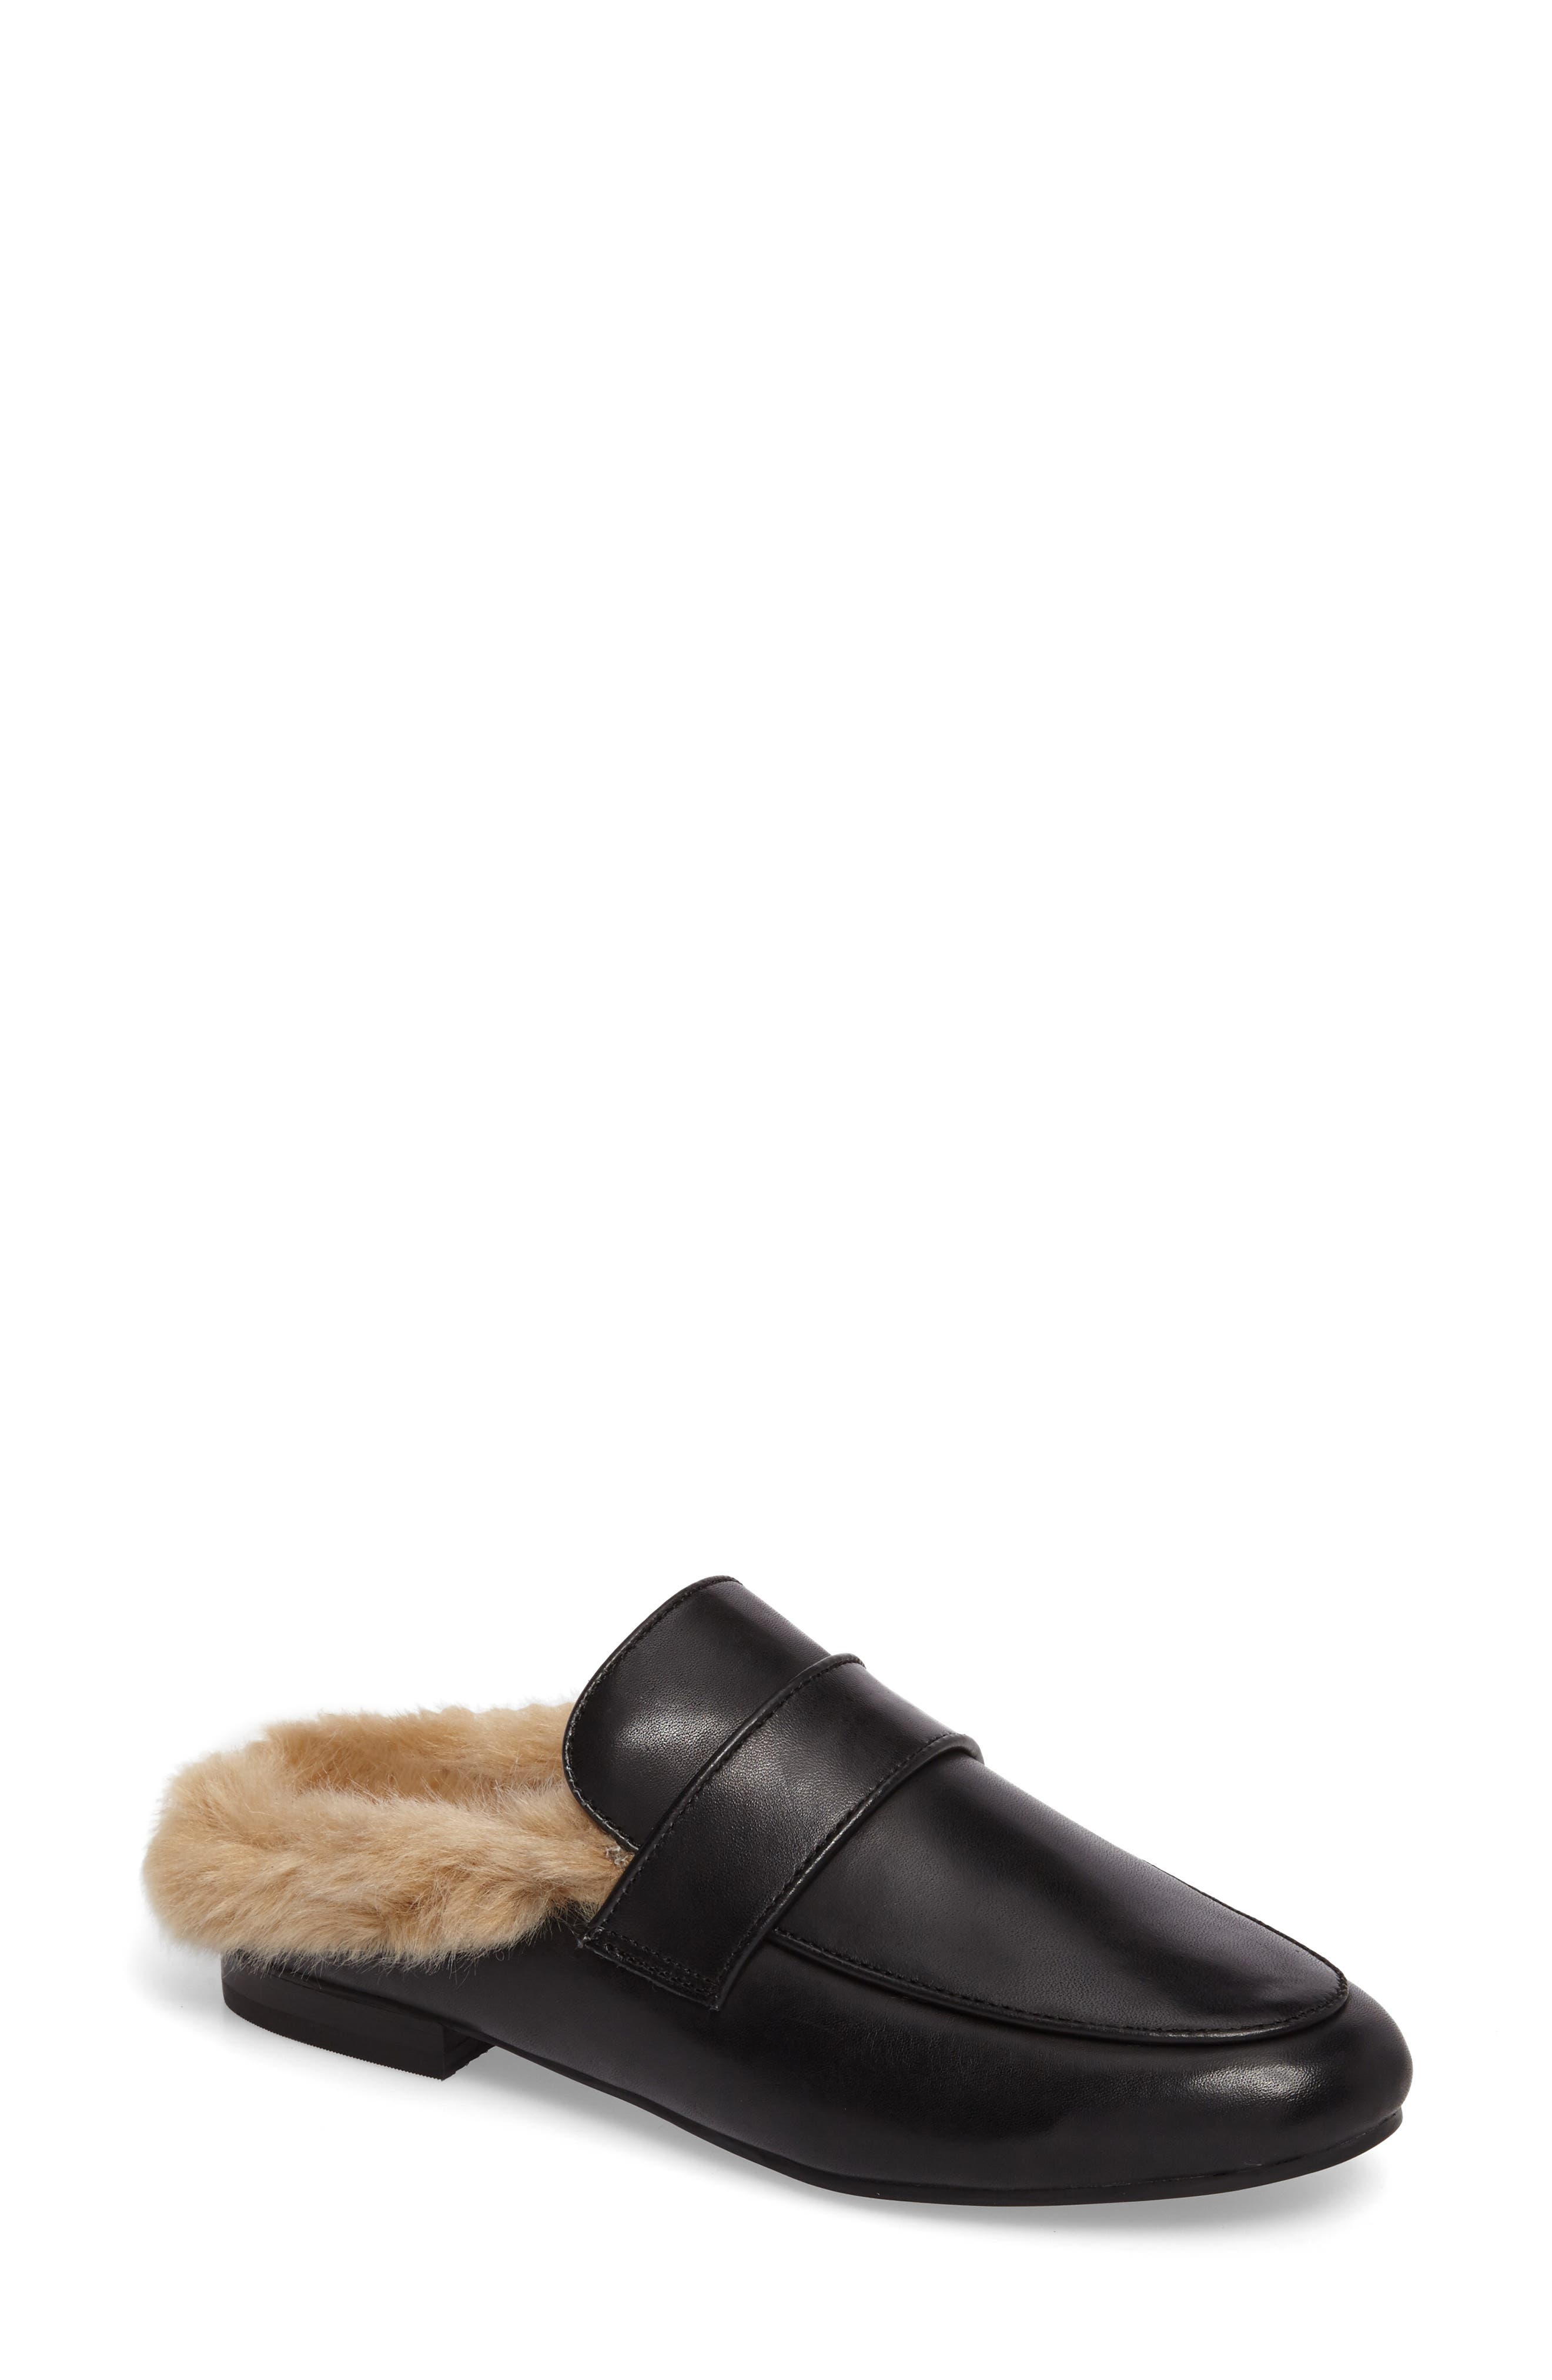 steve madden mules with fur